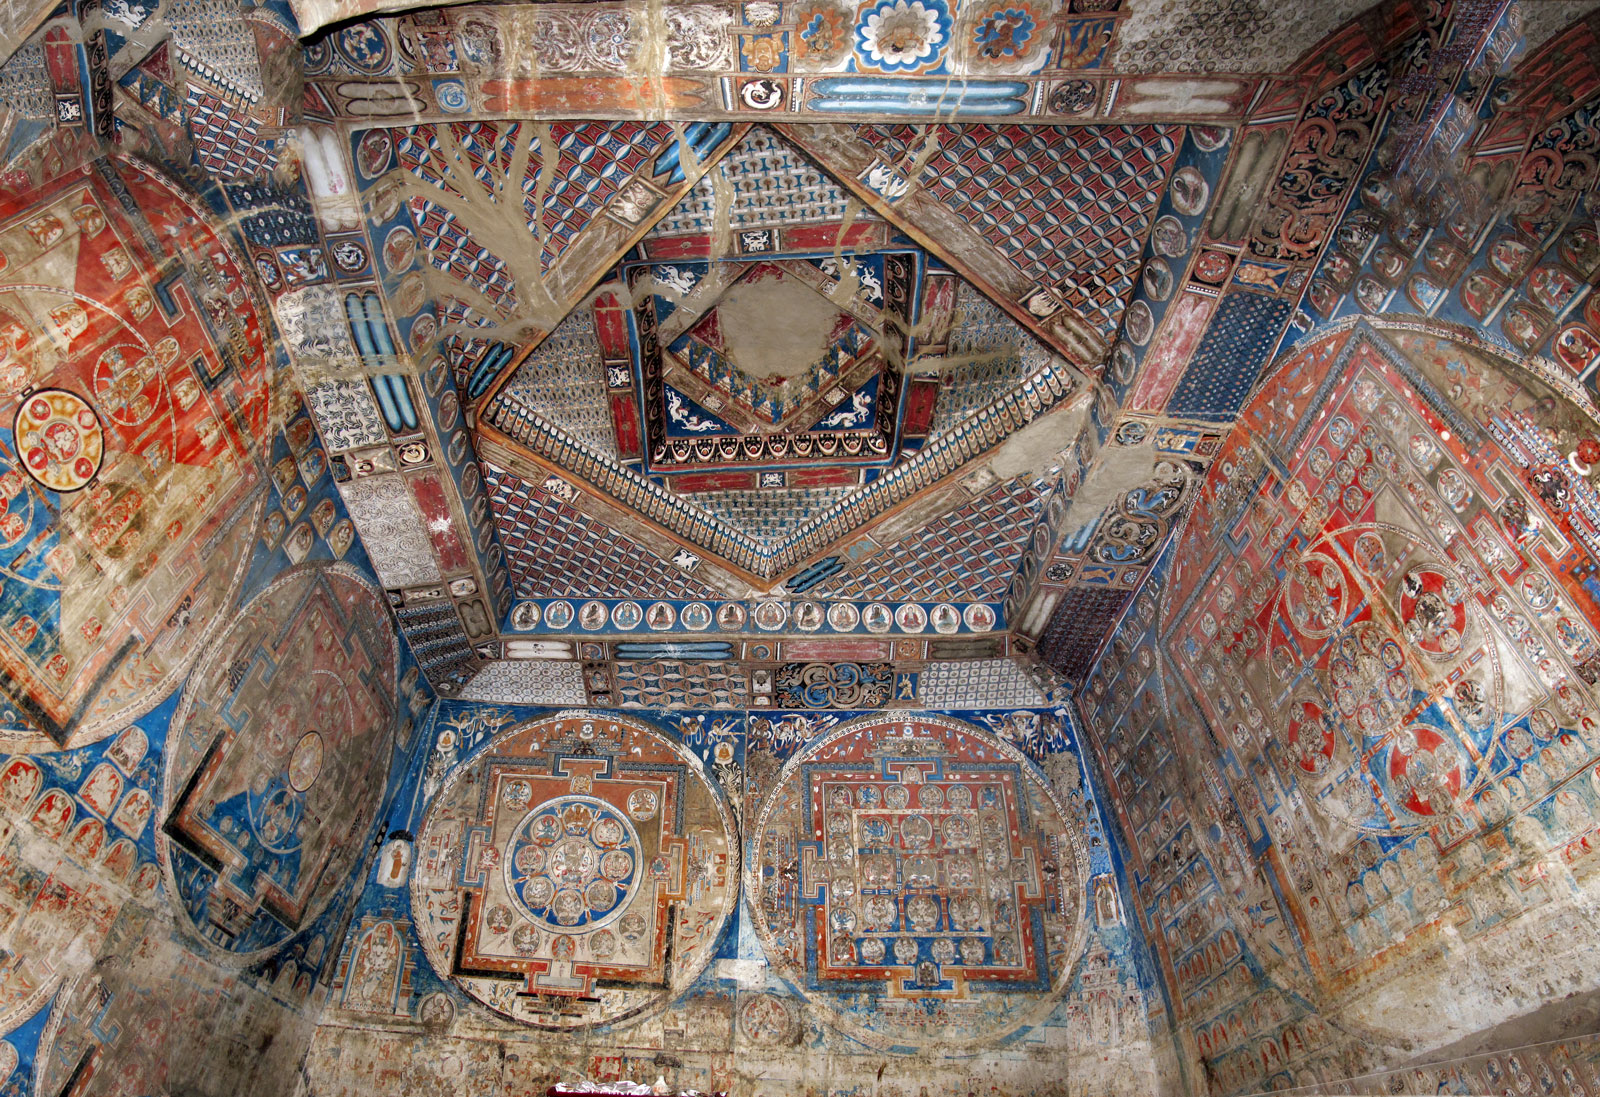 Temple room in Dungkar Cave 1, one of four caves that were residences of the Guge dynasty beginning in the twelfth century